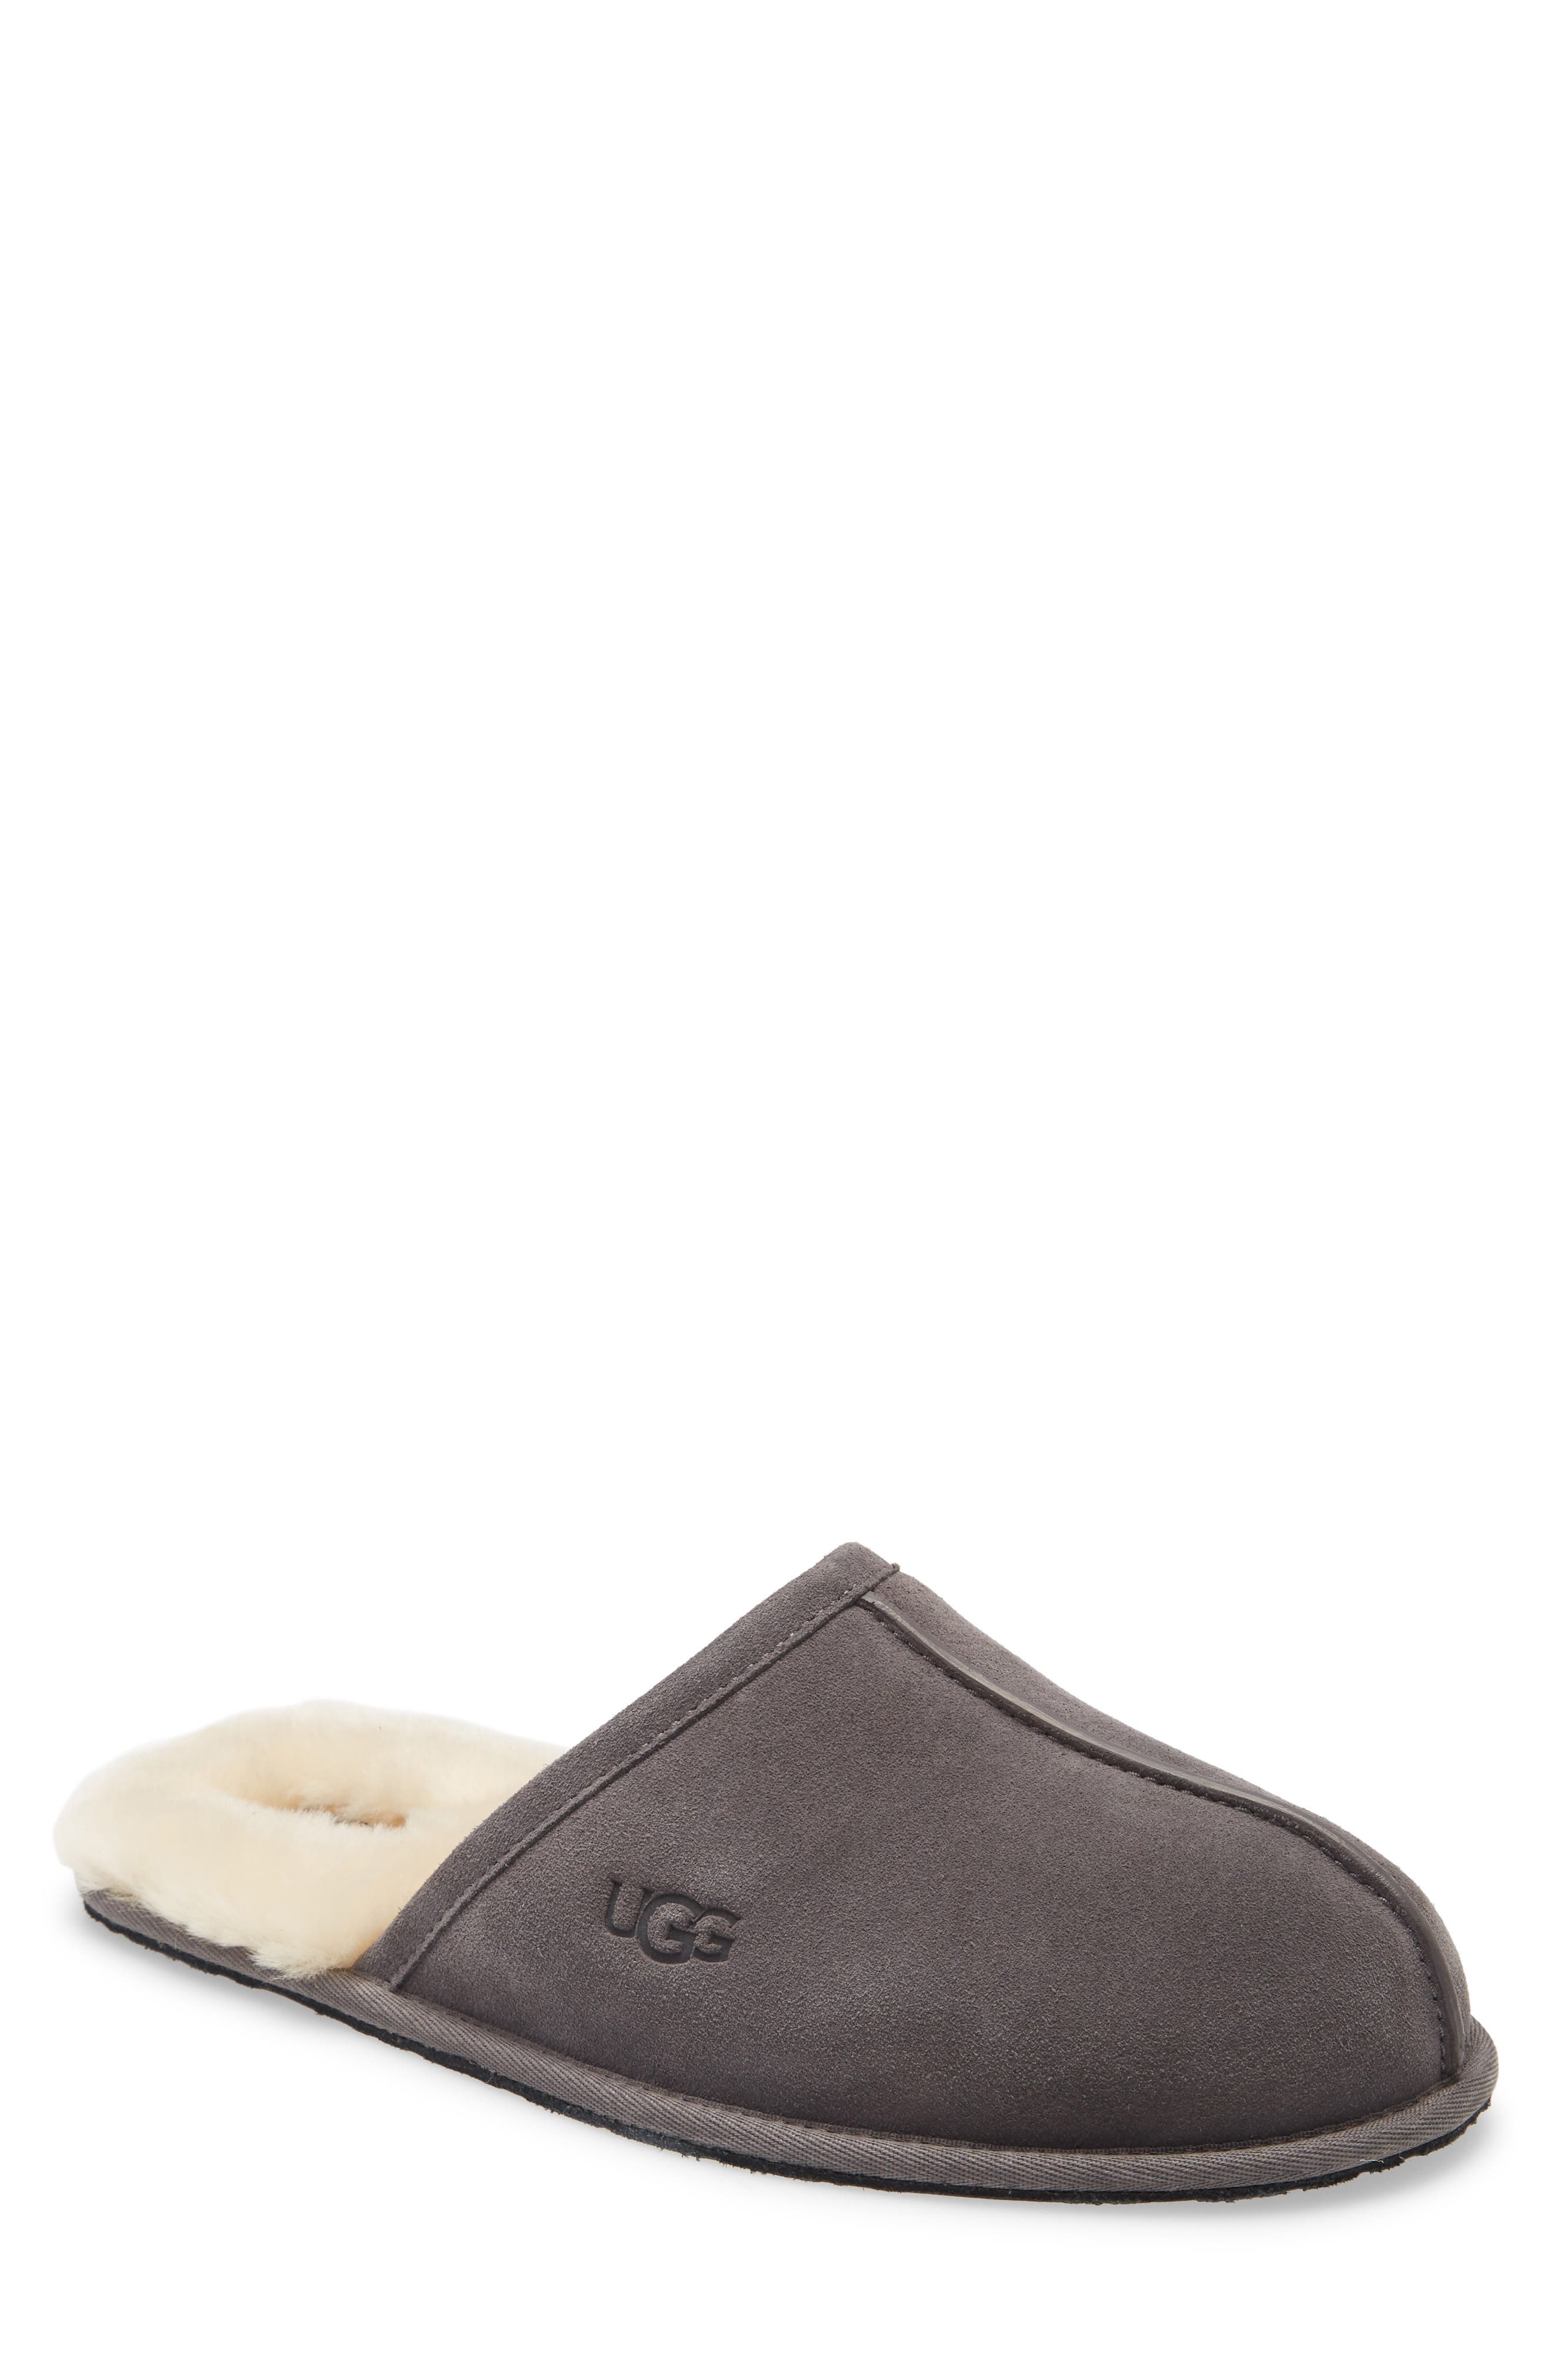 ugg mens wide slippers